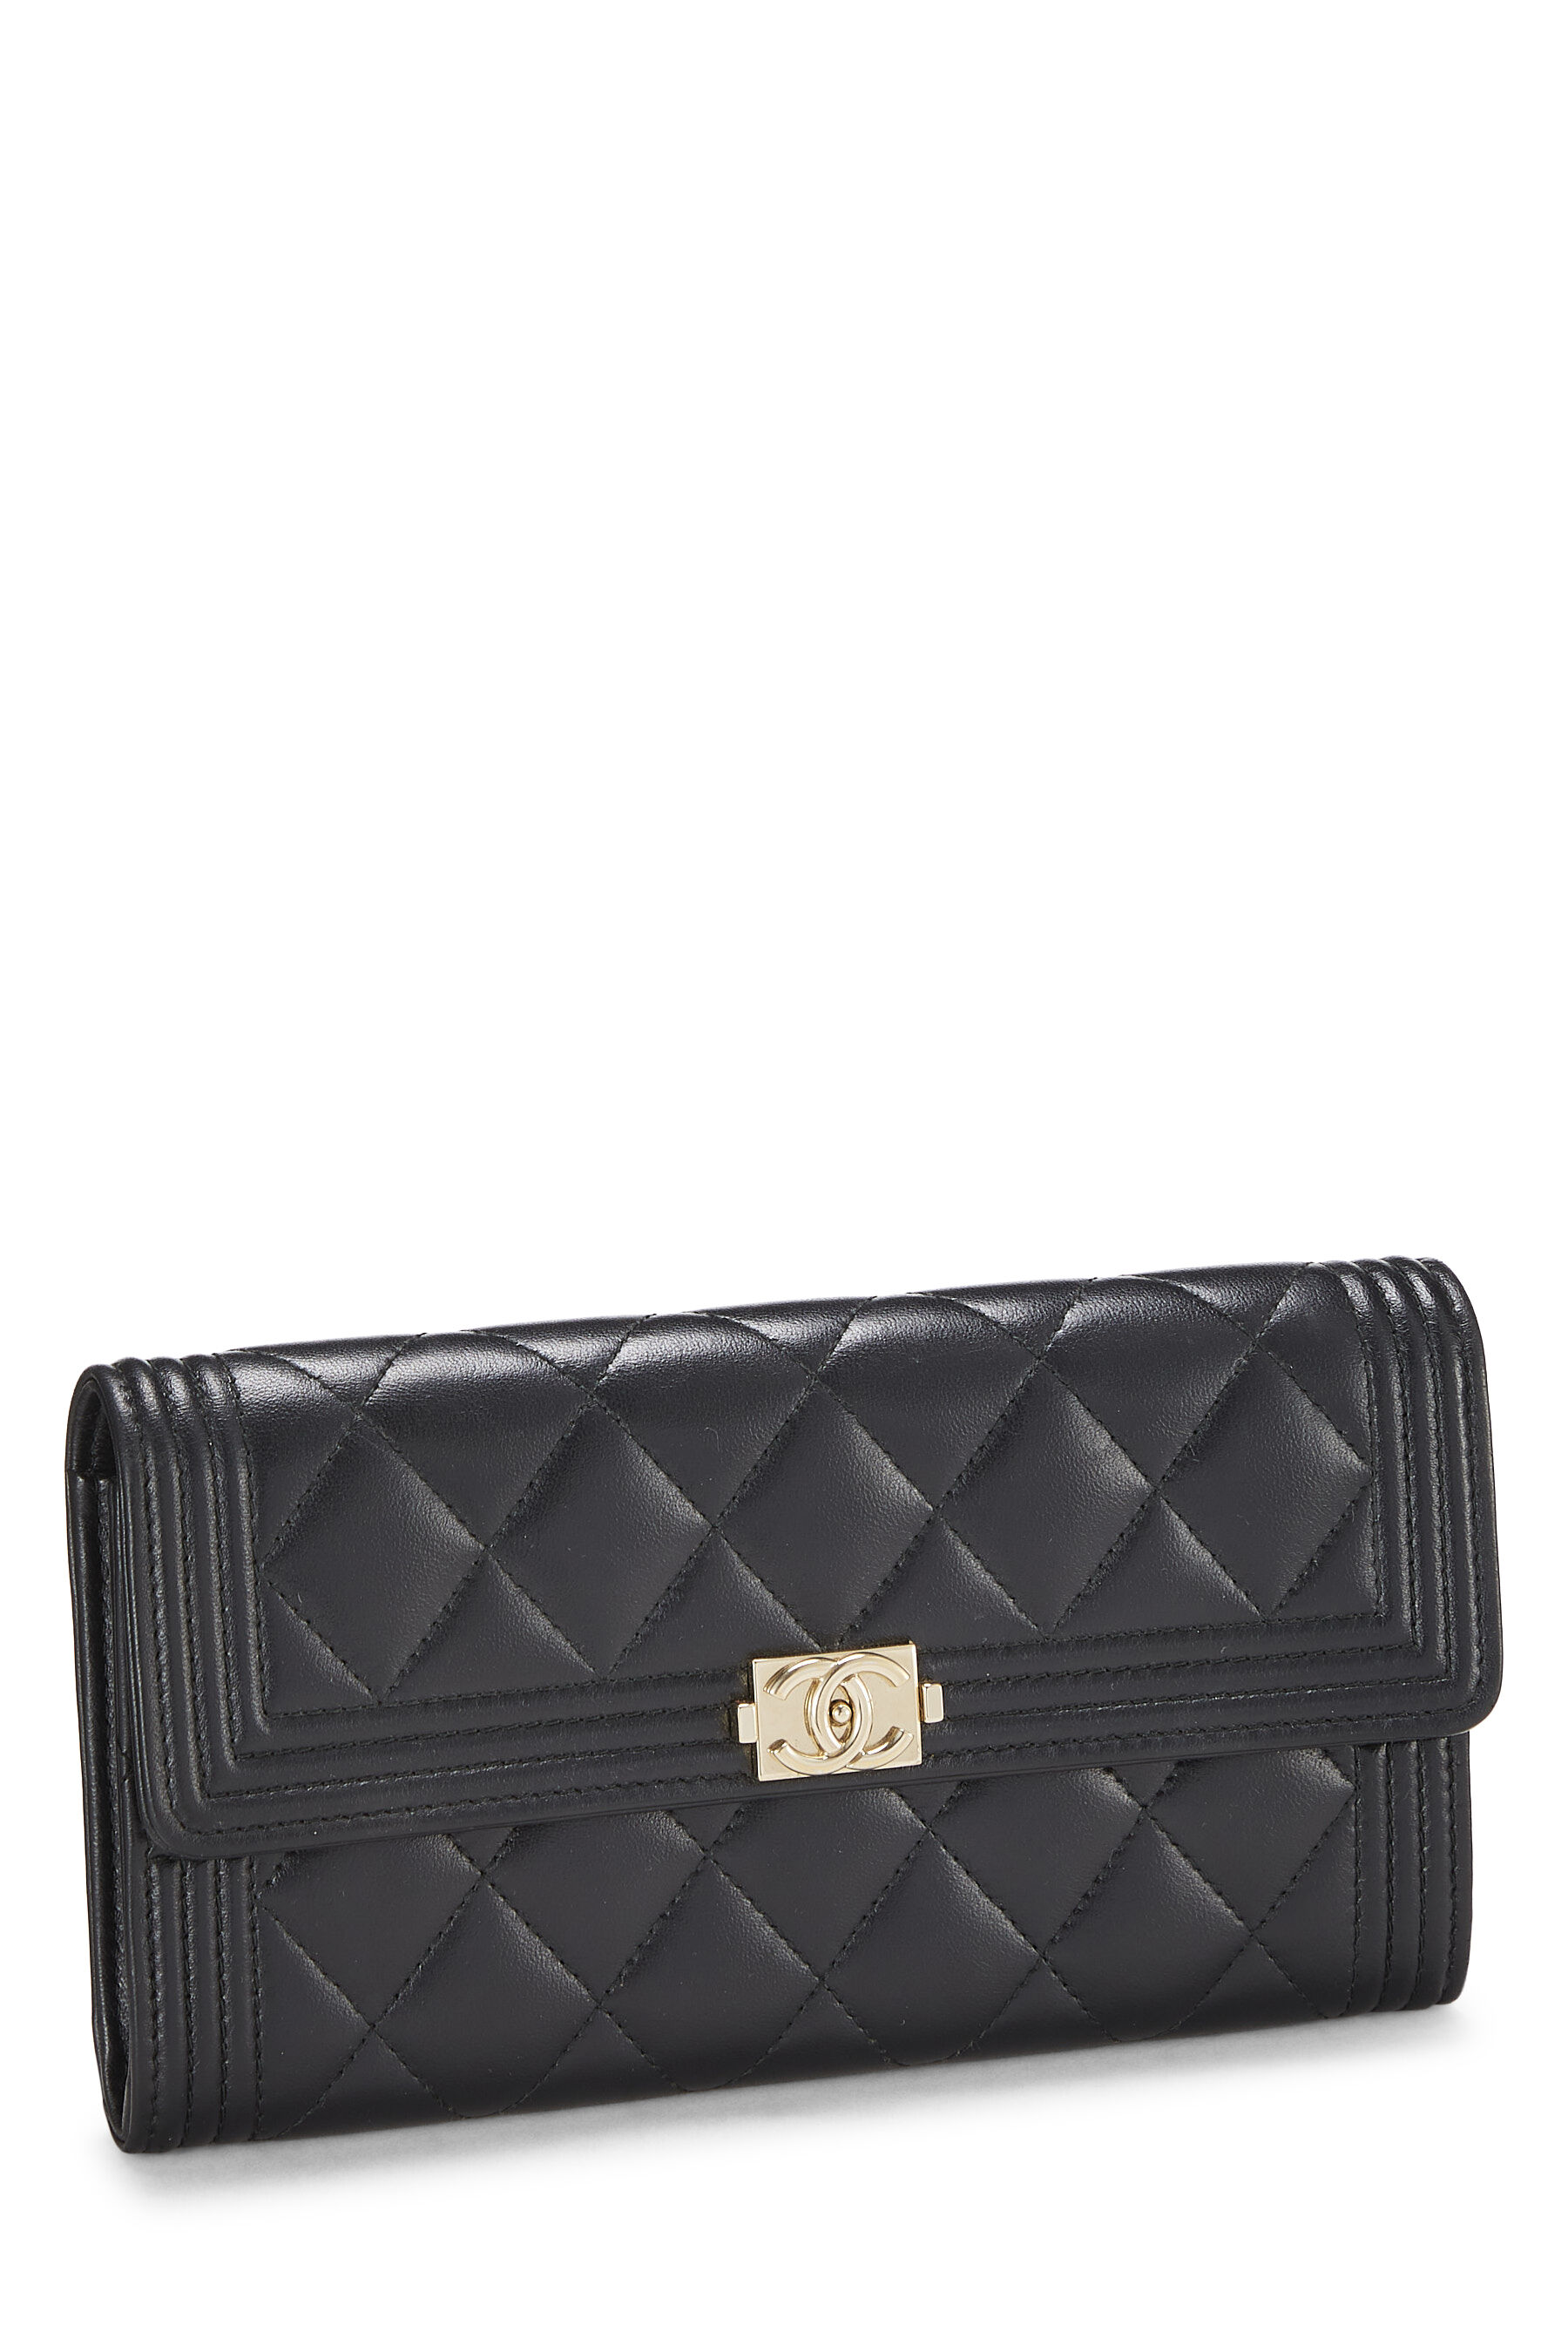 Boy leather wallet Chanel Black in Leather - 36223930